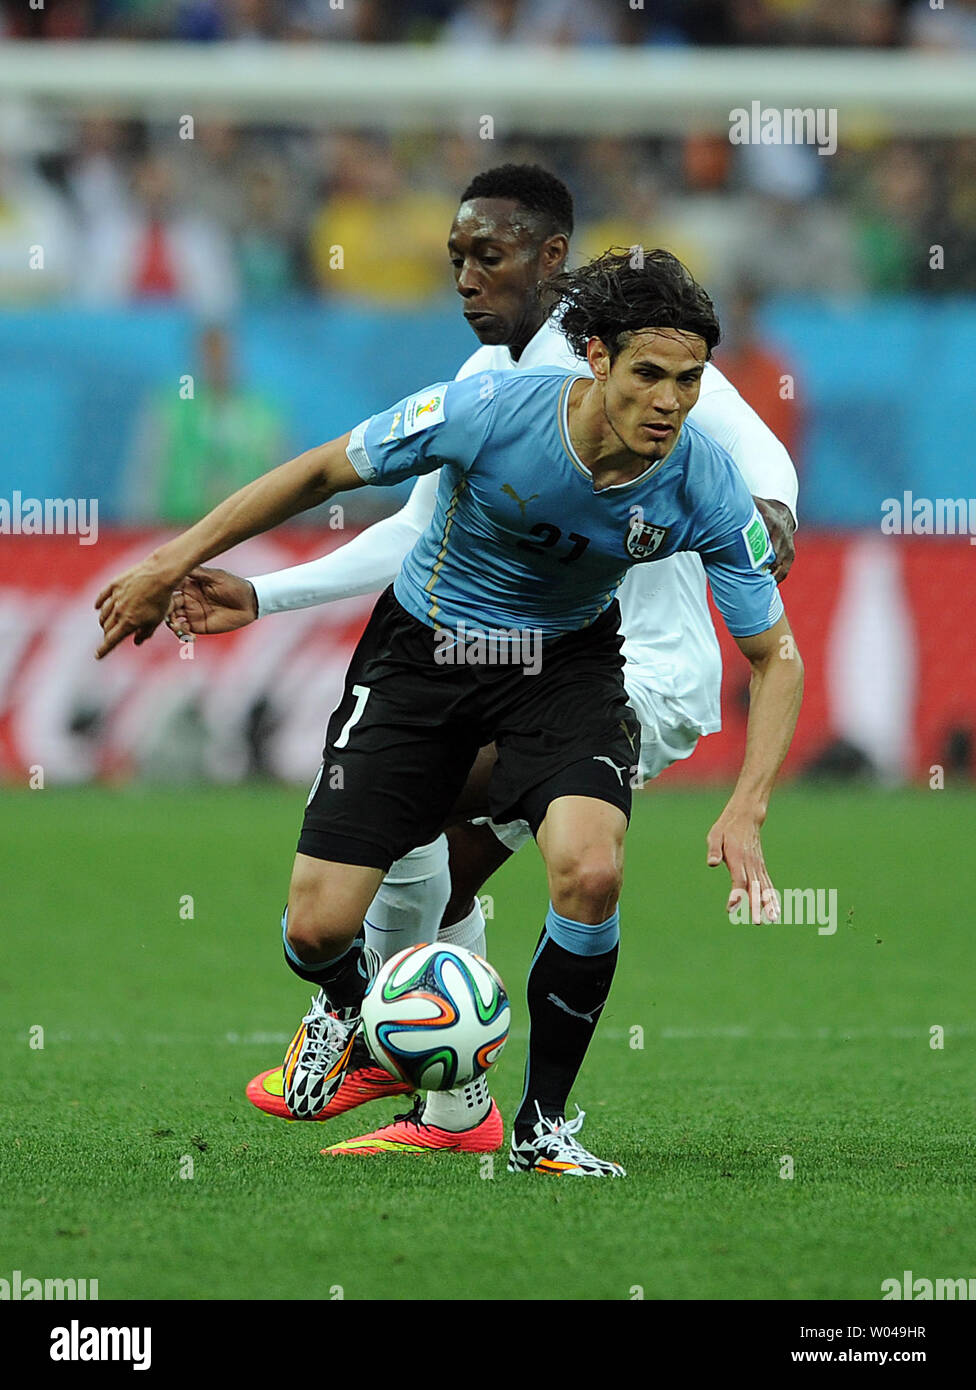 Edinson Cavani (L) of Uruguay competes with Danny Welbeck of England during the 2014 FIFA World Cup Group D match at the Arena Corinthians in Sao Paulo, Brazil on June 19, 2014. UPI/Chris Brunskill Stock Photo